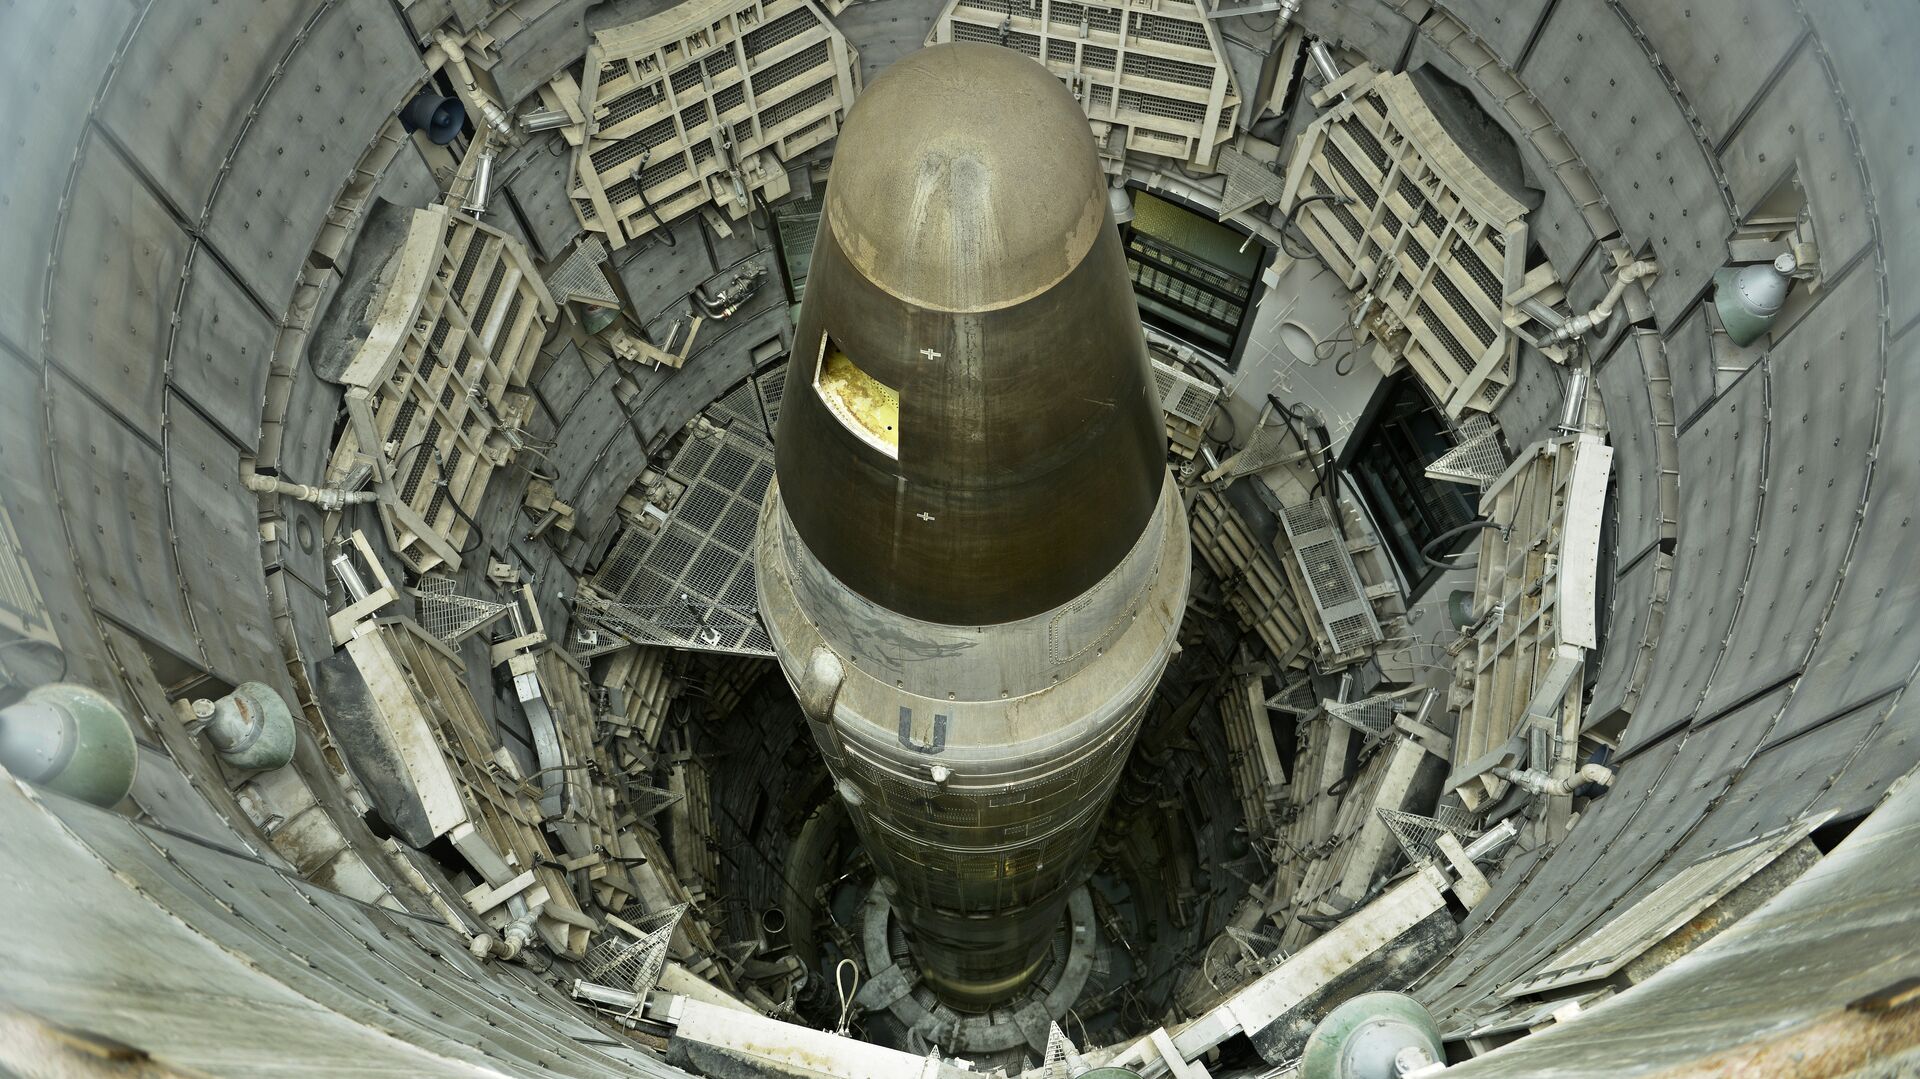 A deactivated Titan II nuclear ICMB is seen in a silo at the Titan Missile Museum on May 12, 2015 in Green Valley, Arizona - Sputnik International, 1920, 02.02.2022